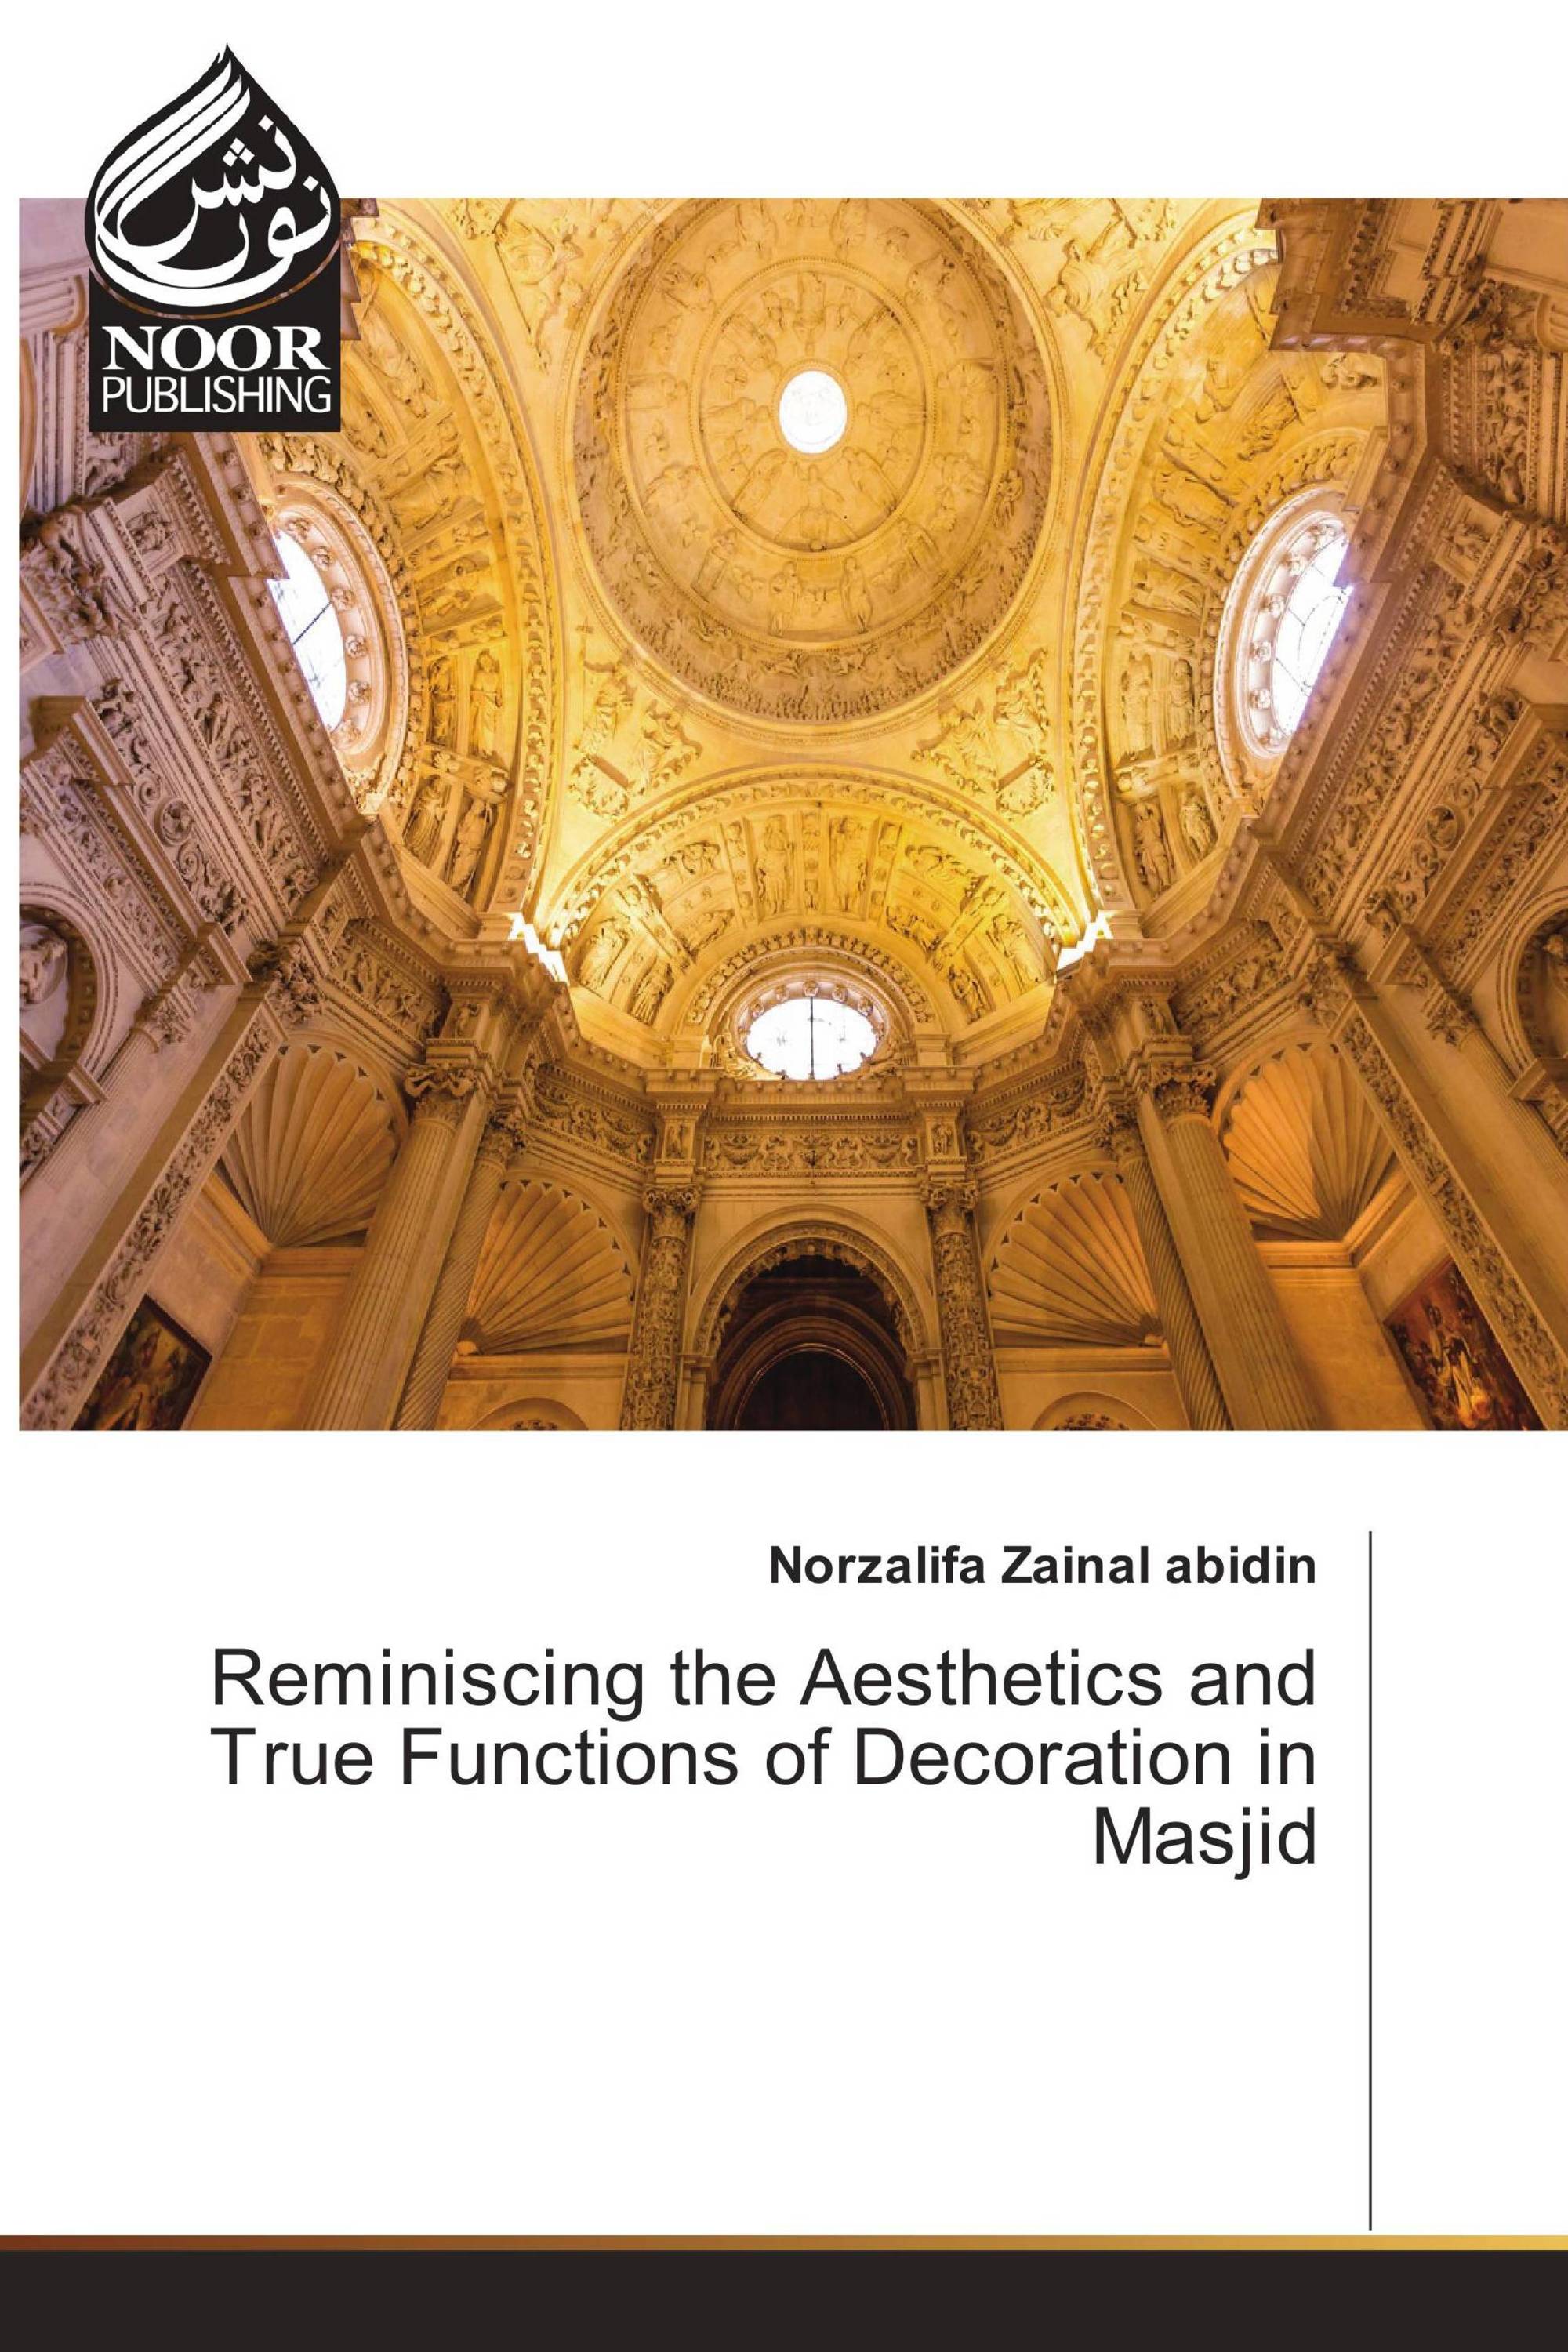 Reminiscing the Aesthetics and True Functions of Decoration in Masjid